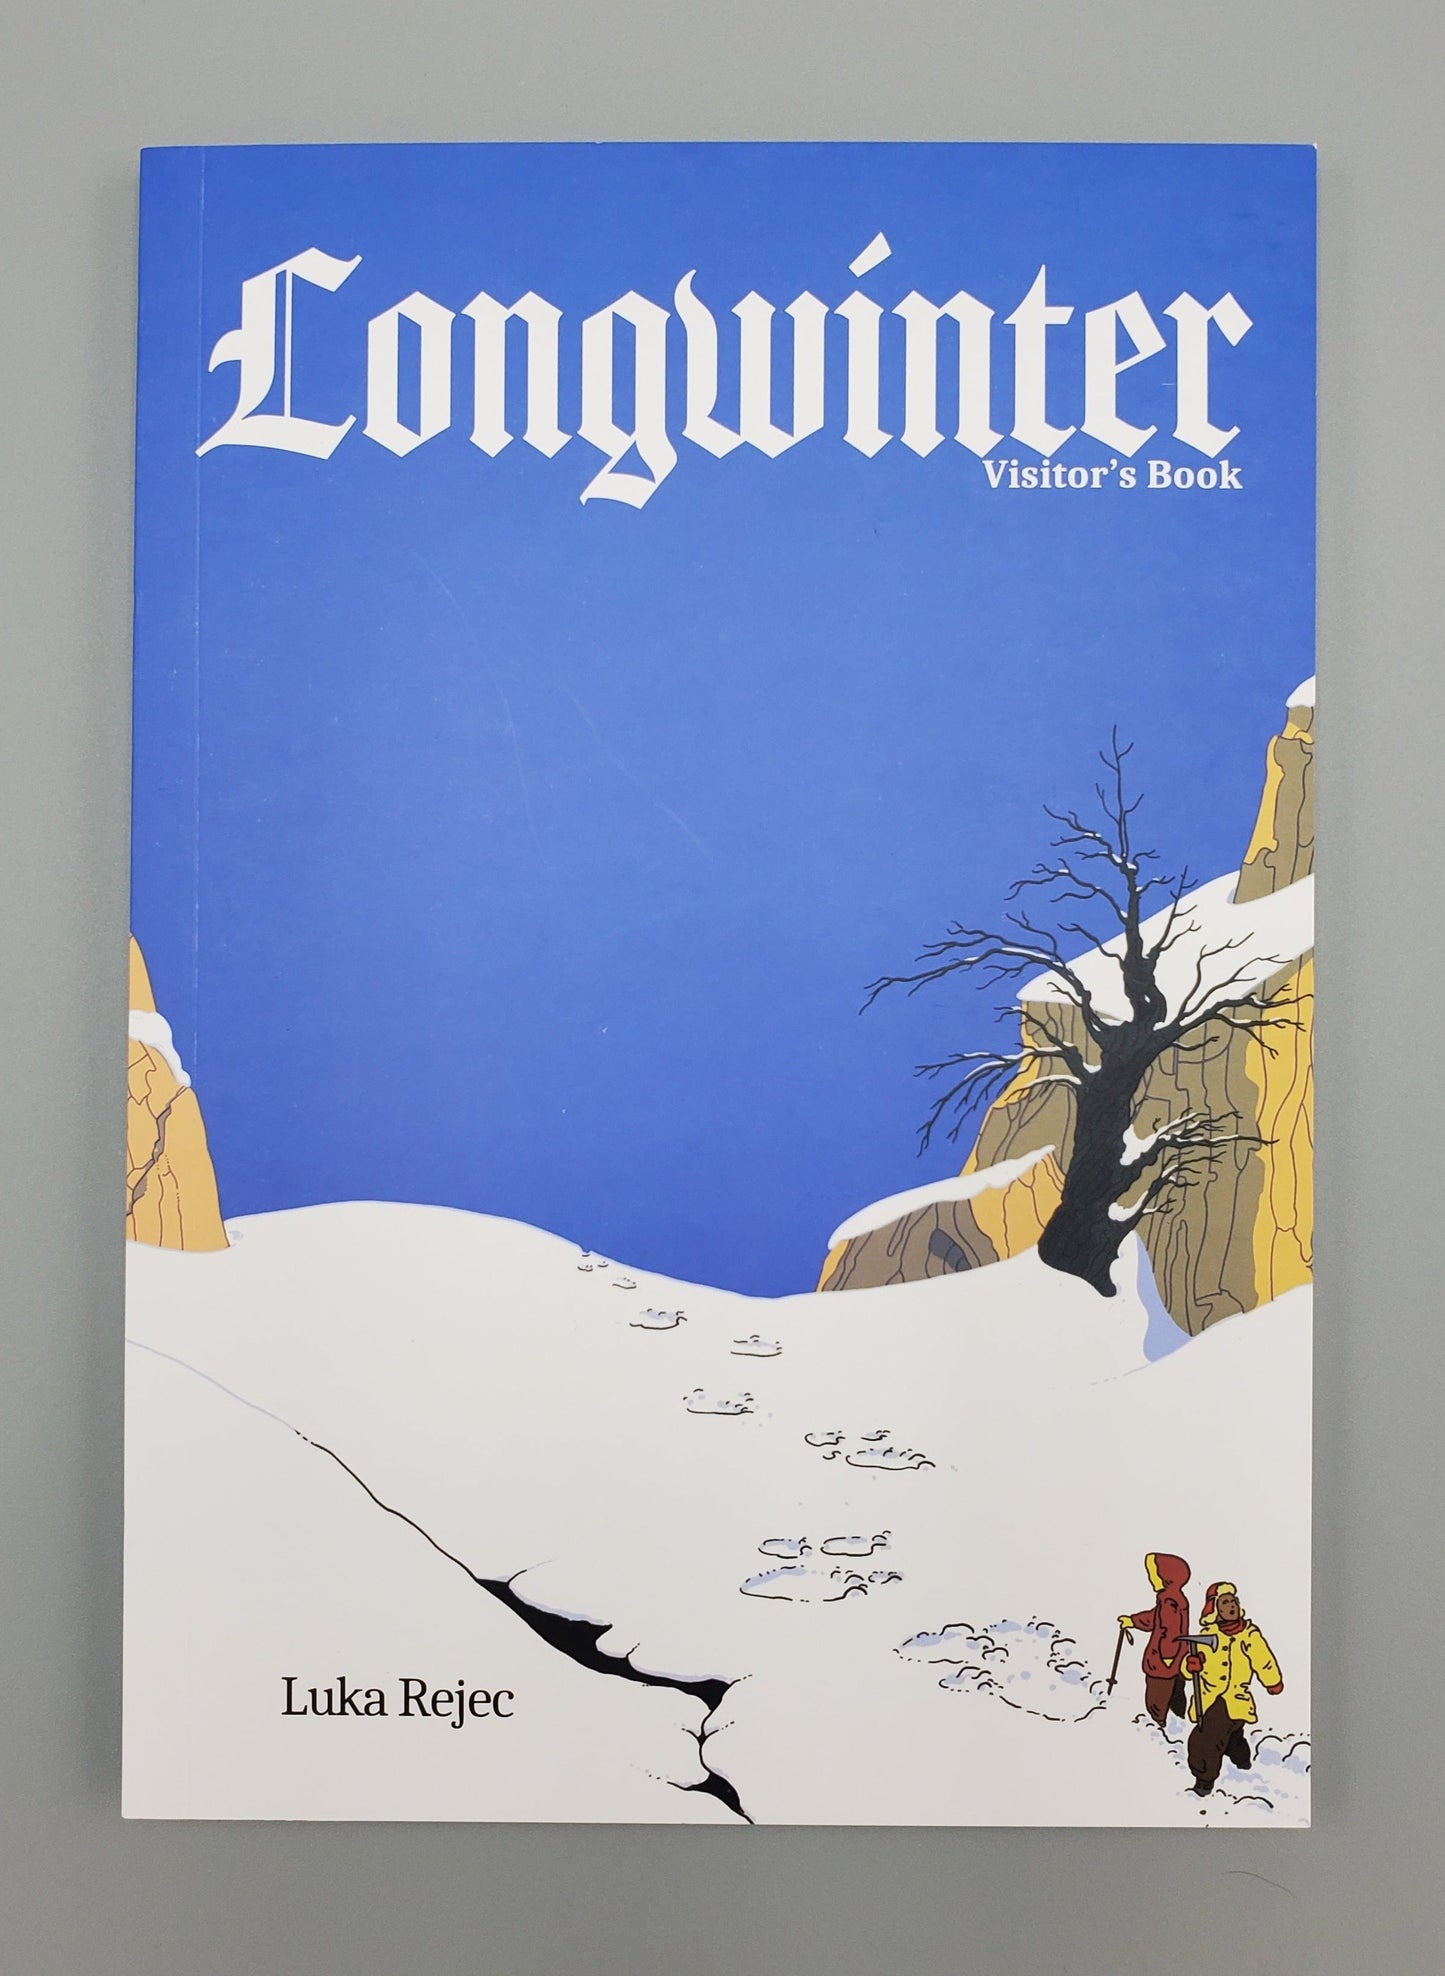 Longwinter: Visitor's Book